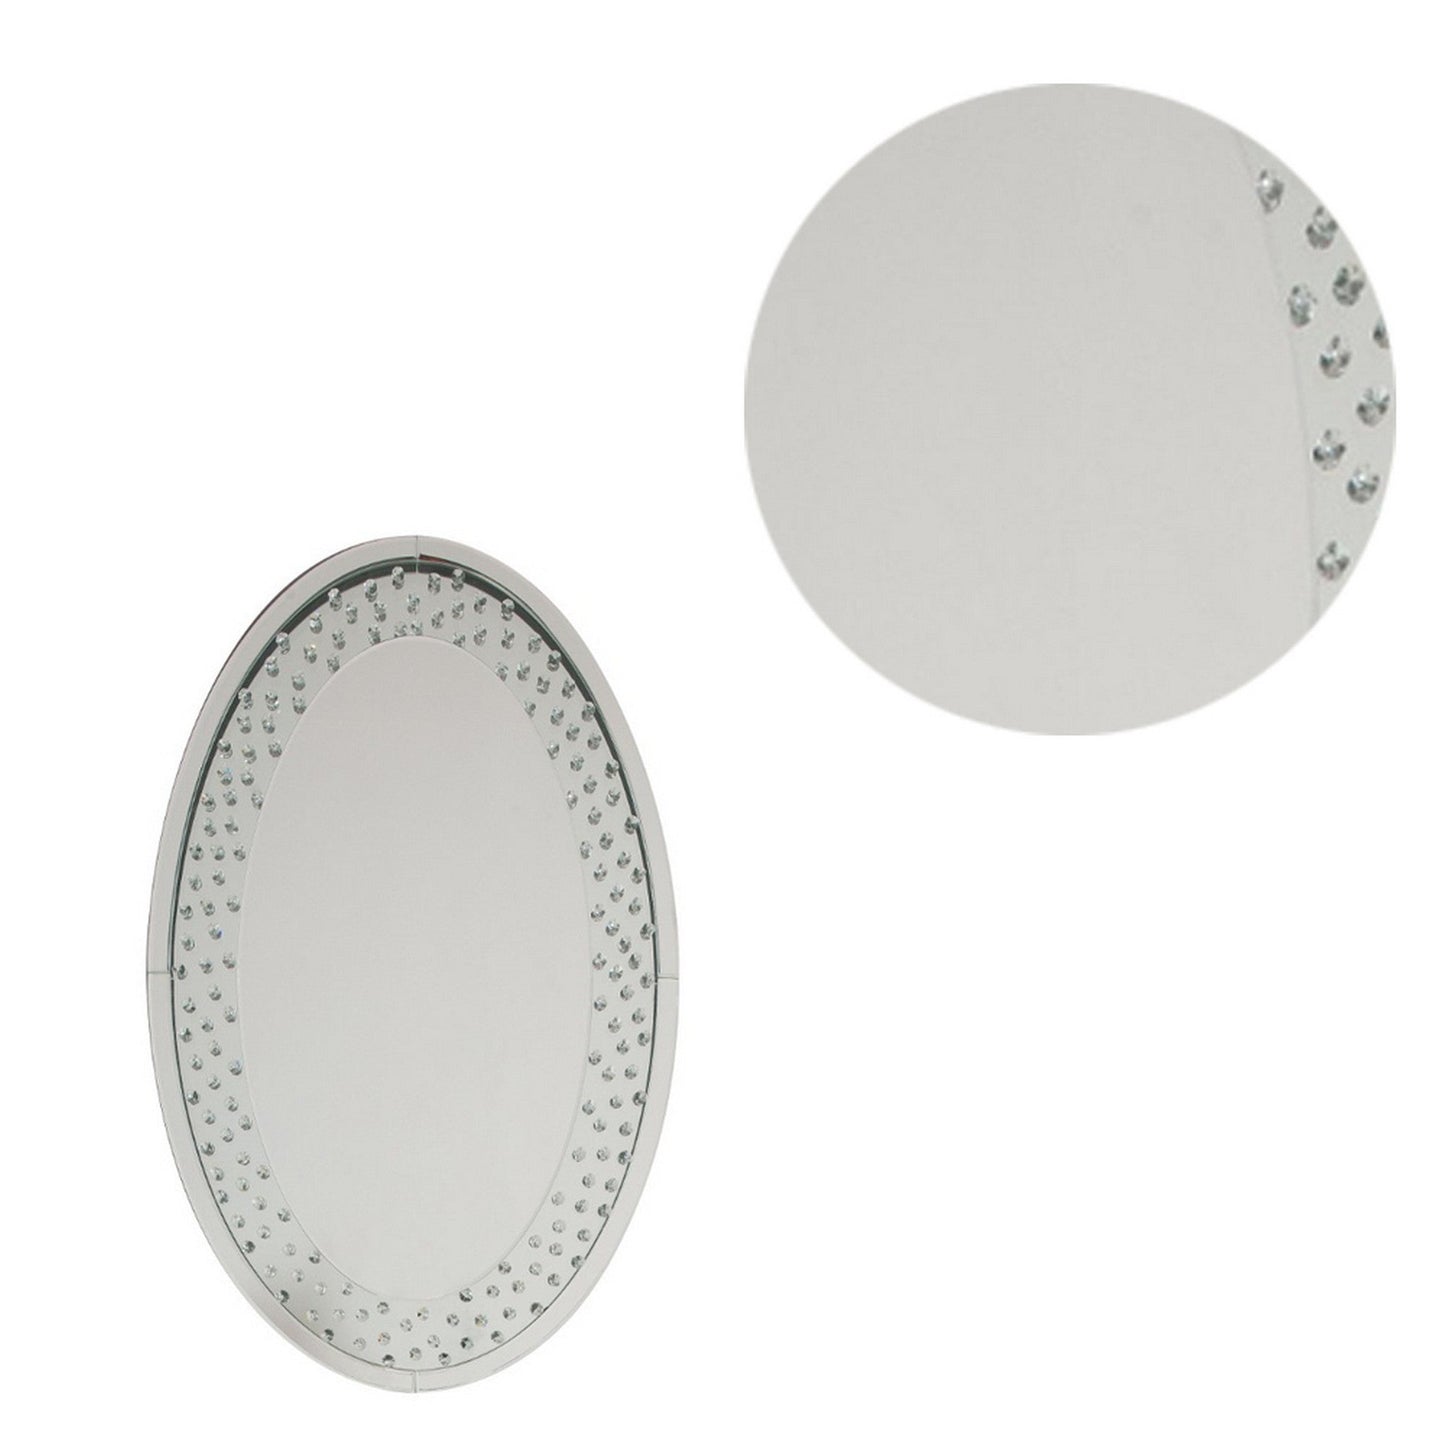 Benzara Accent Wall Mirror With Round Crystal Inserts